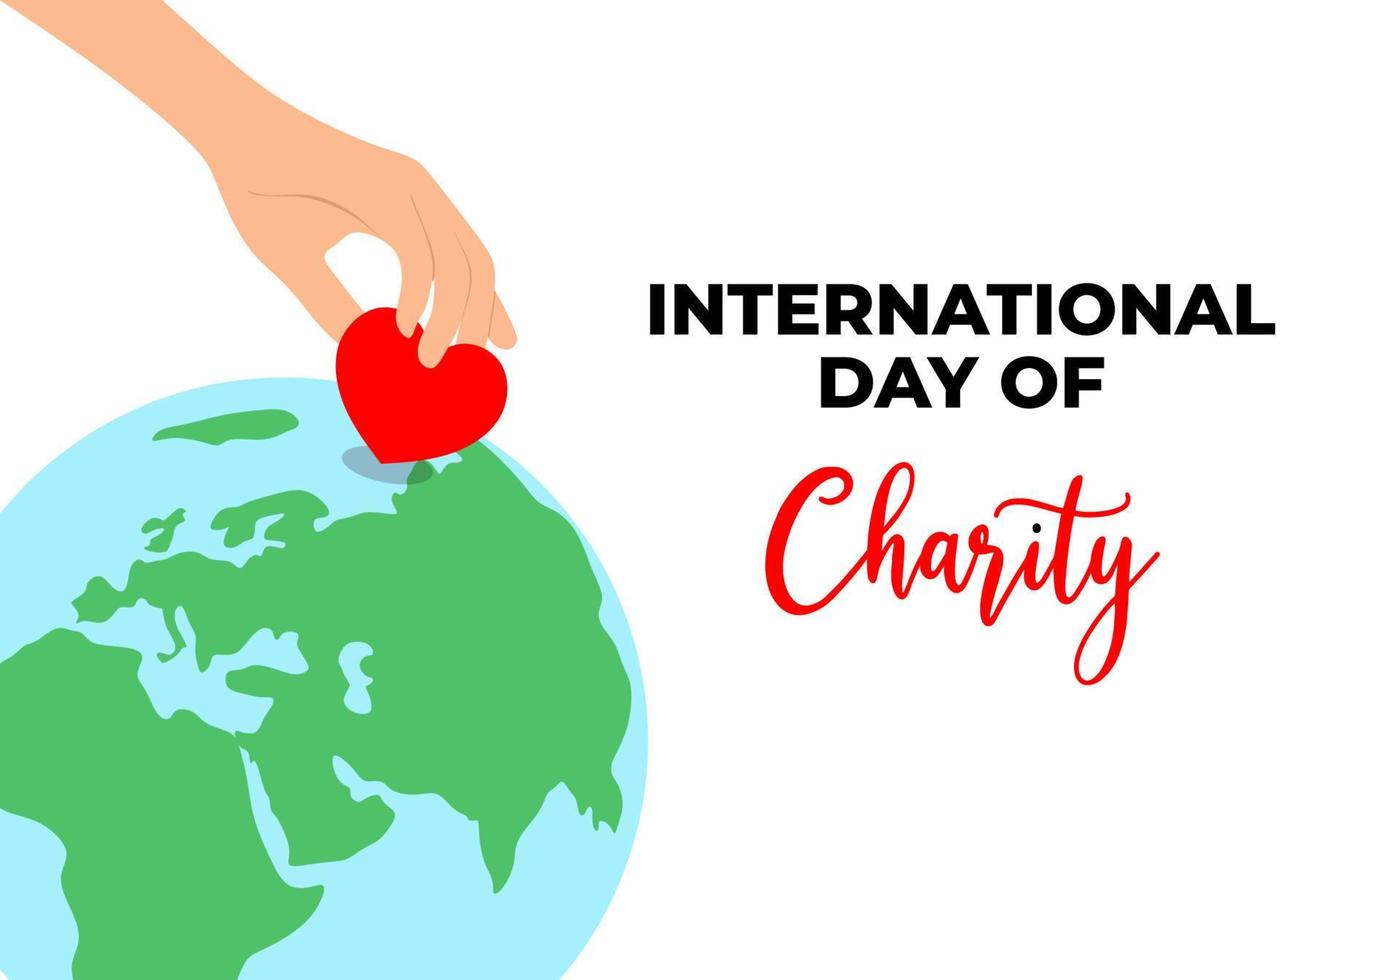 International day of charity banner poster on september 5 th with hand give love symbol in earth globe on white background vector